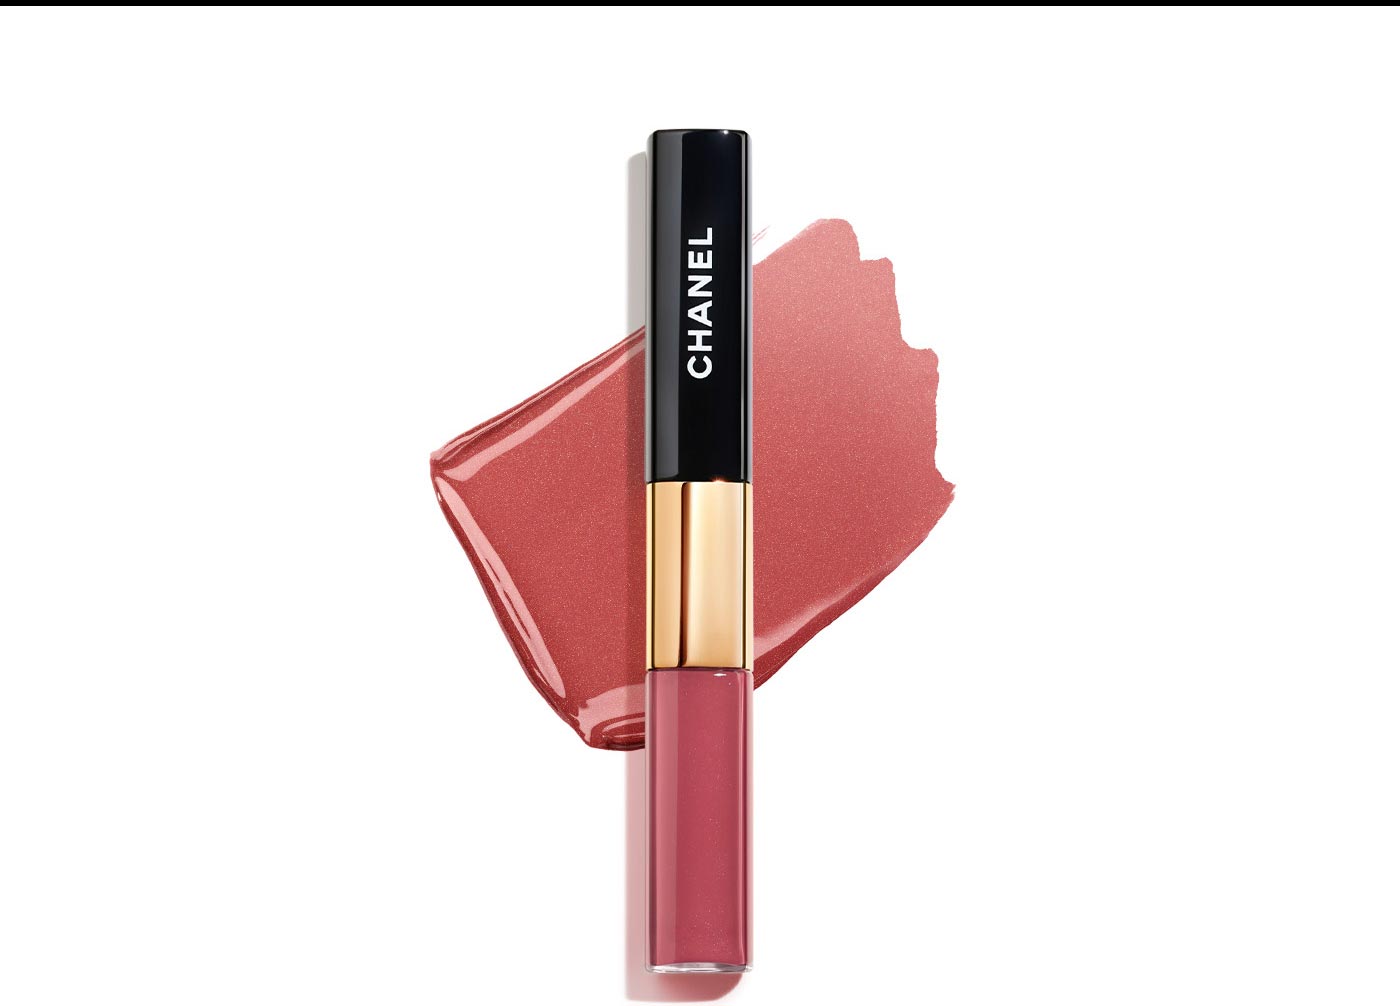 LE ROUGE DUO ULTRA TENUE in shade 48 – Soft Rose